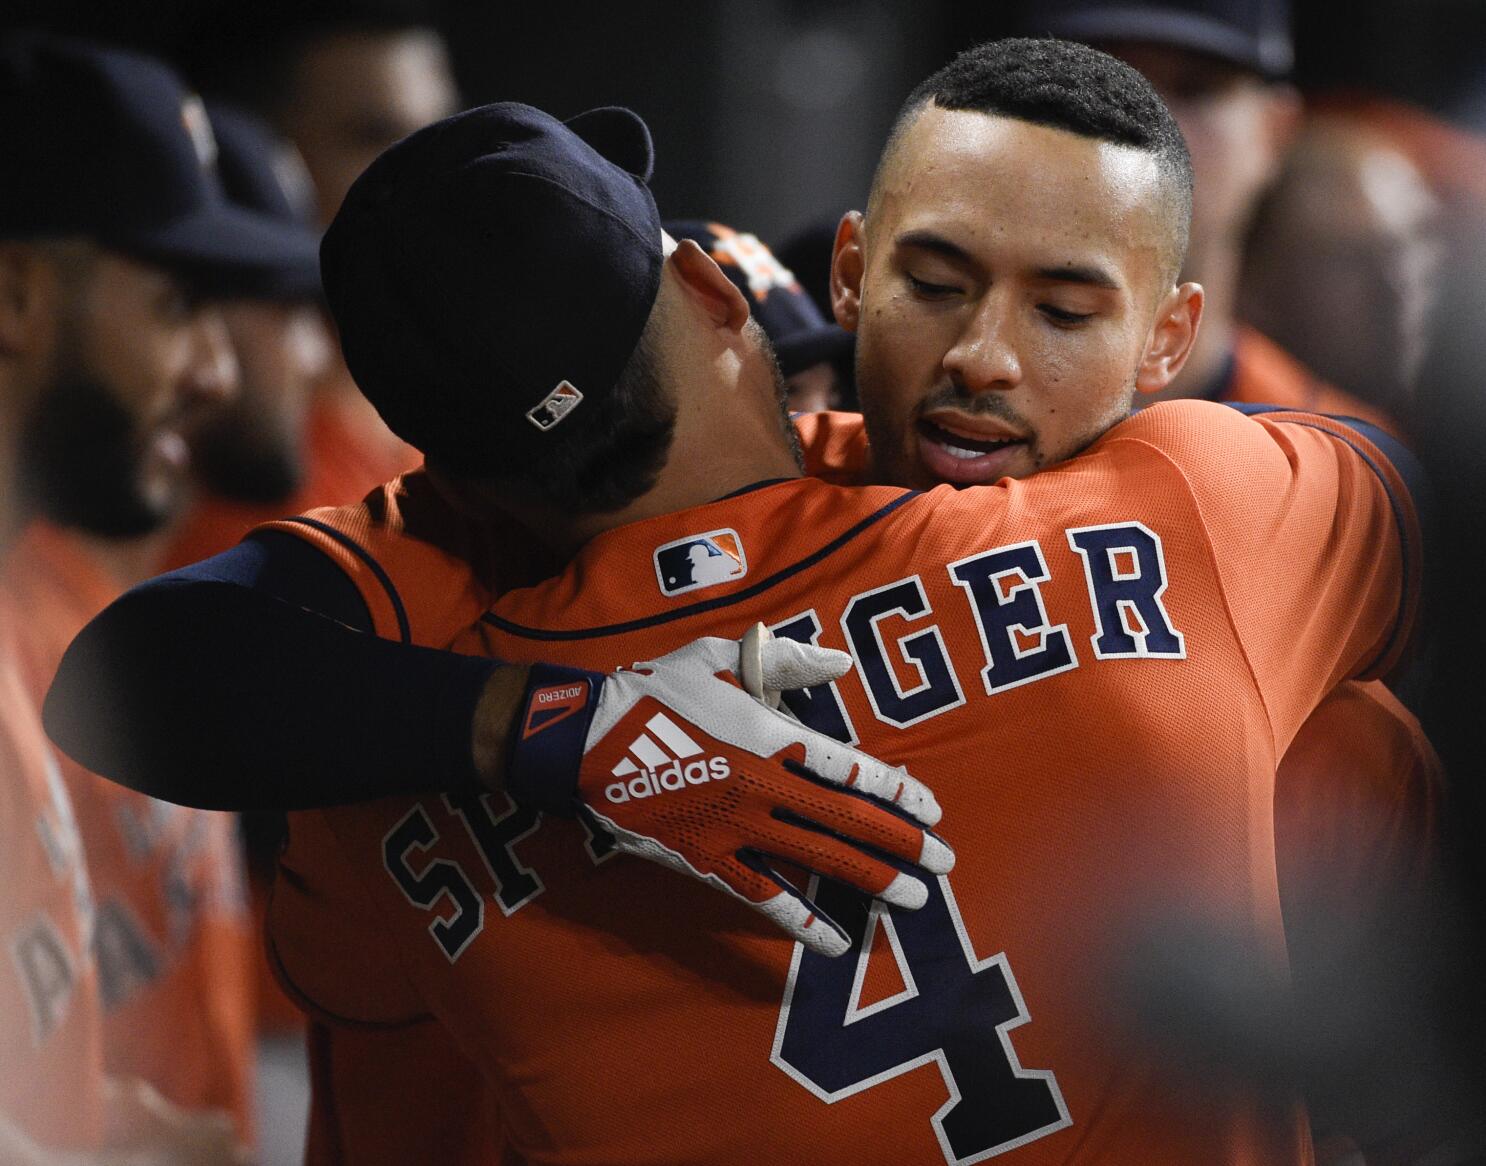 Correa HRs twice, Astros magic number at 1 for AL West - The San Diego  Union-Tribune